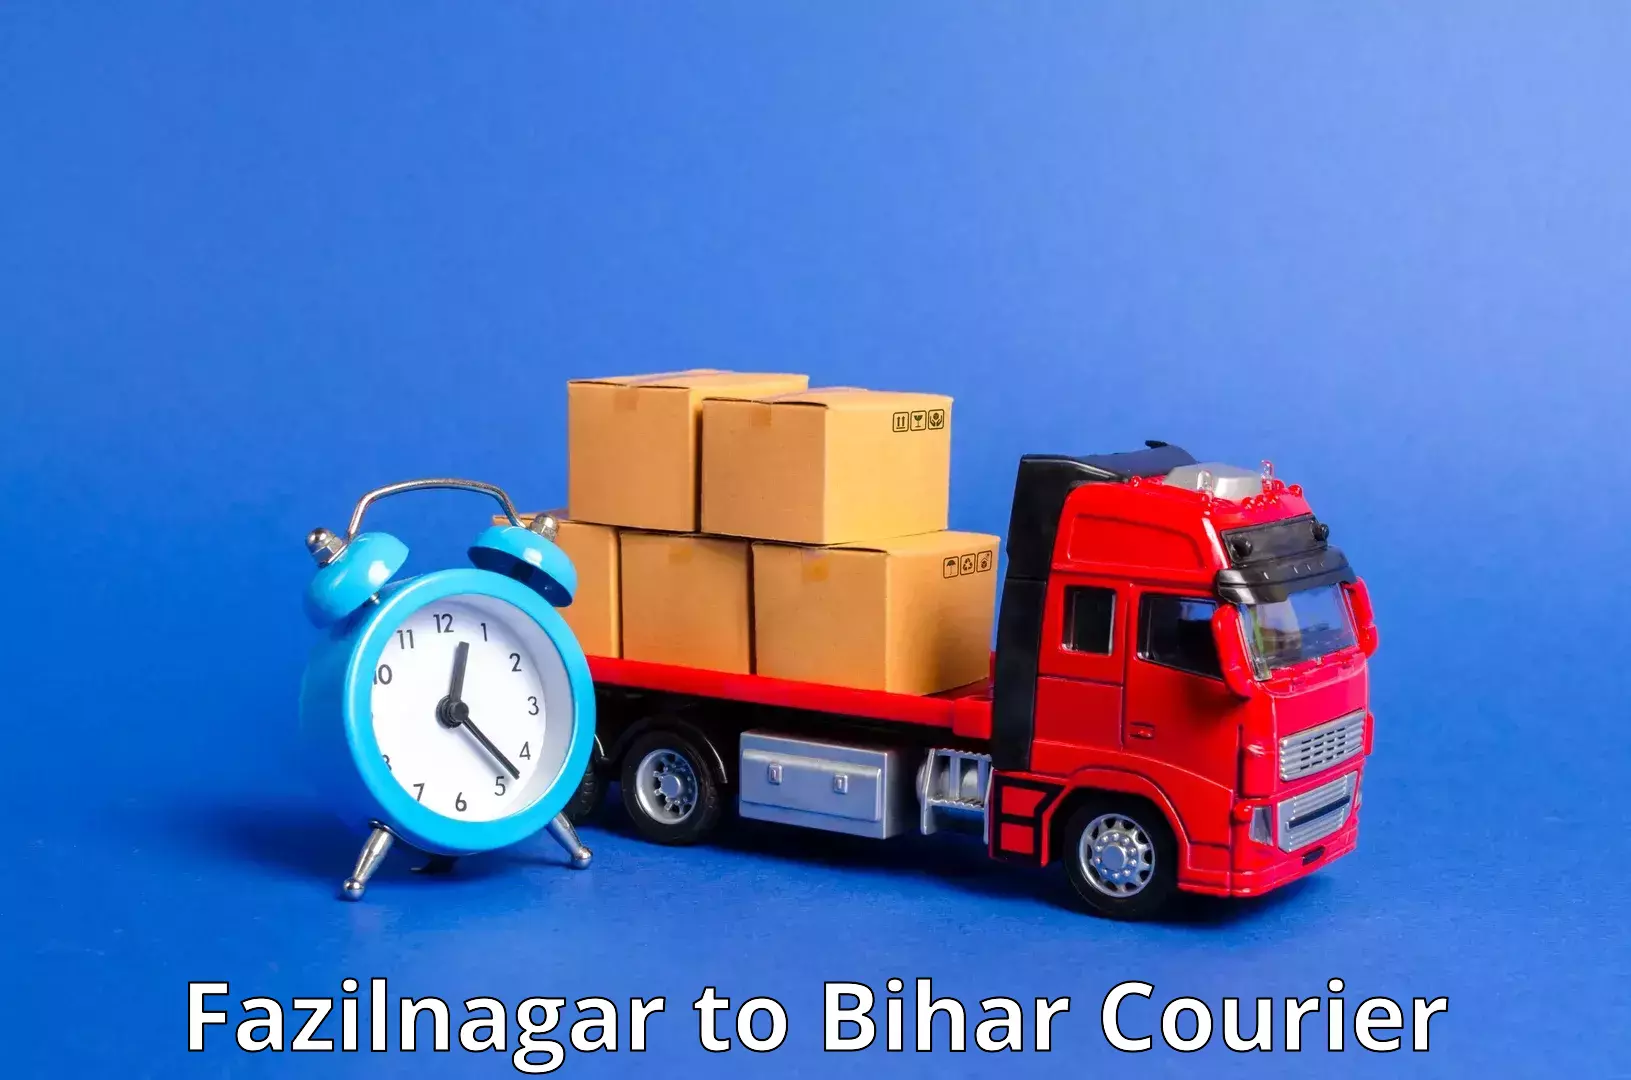 Fast delivery service Fazilnagar to Sangrampur